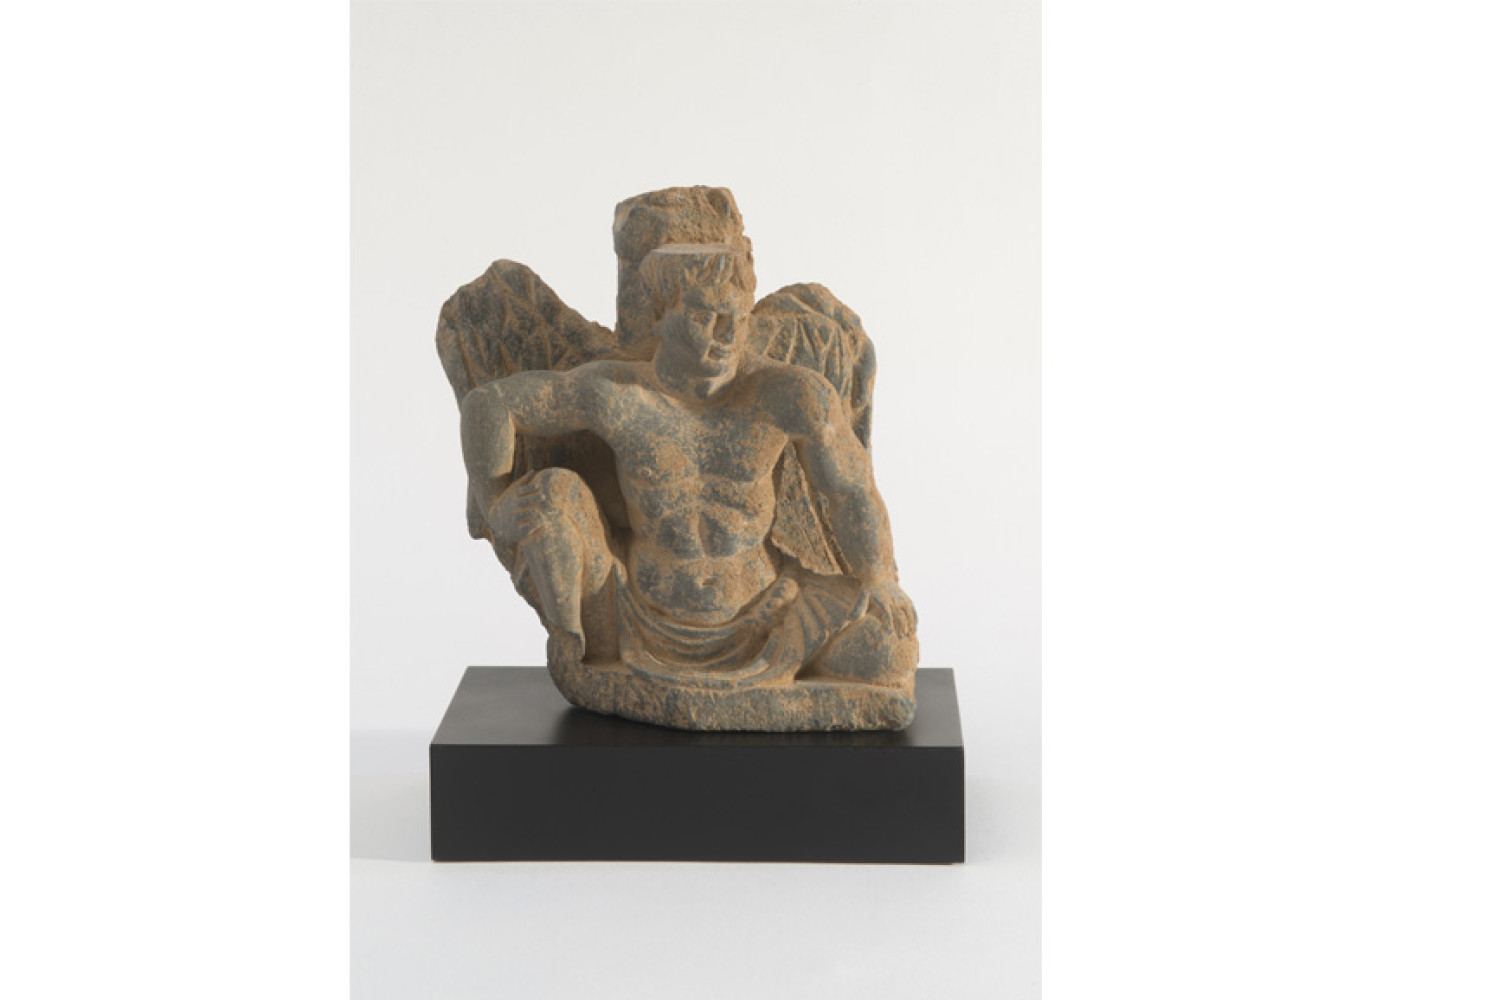 Atlante, c. 1st-3rd cent; Schist; Ancient Gandhara (now NW Pakistan); Courtesy of a private collection